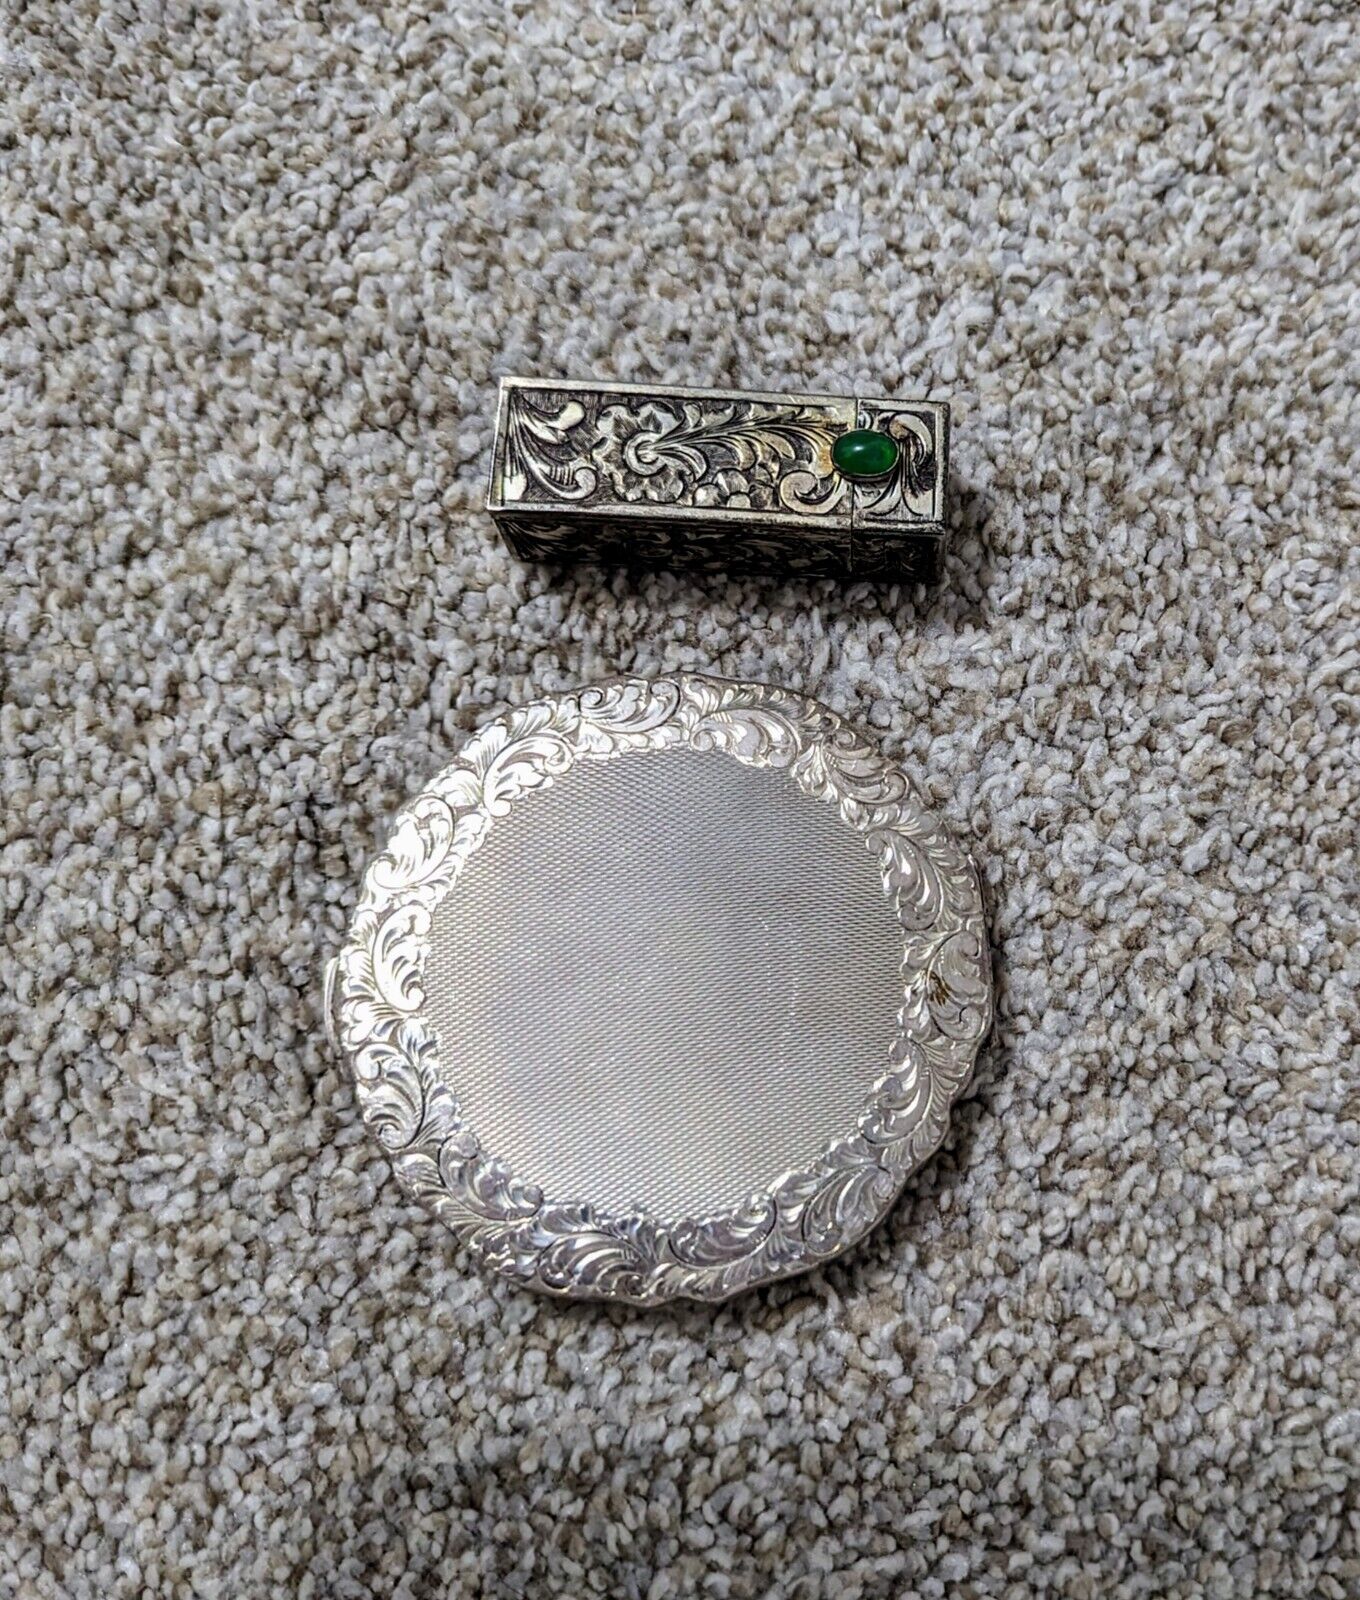 Vintage 800 silver engraved lipstick compact with mirror and Powder Compact